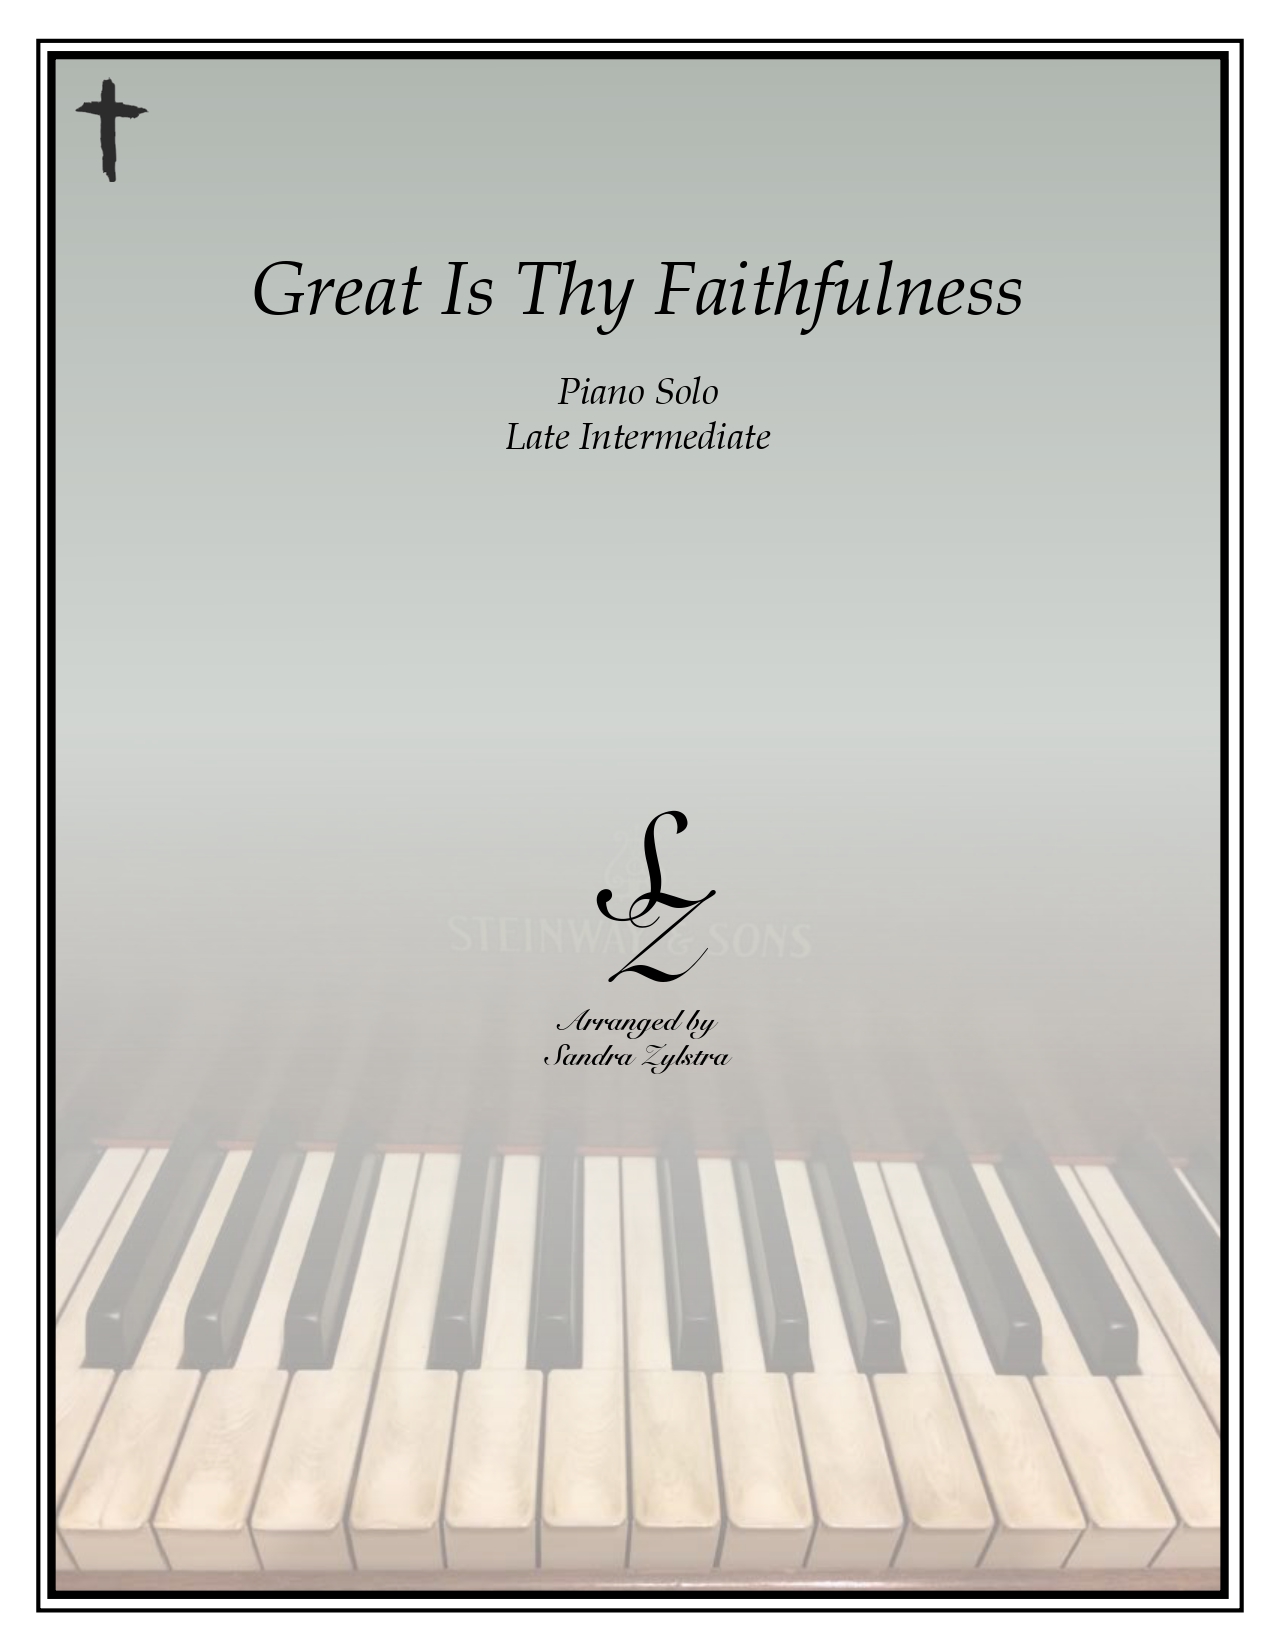 Great Is Thy Faithfulness late intermediate piano cover page 00011